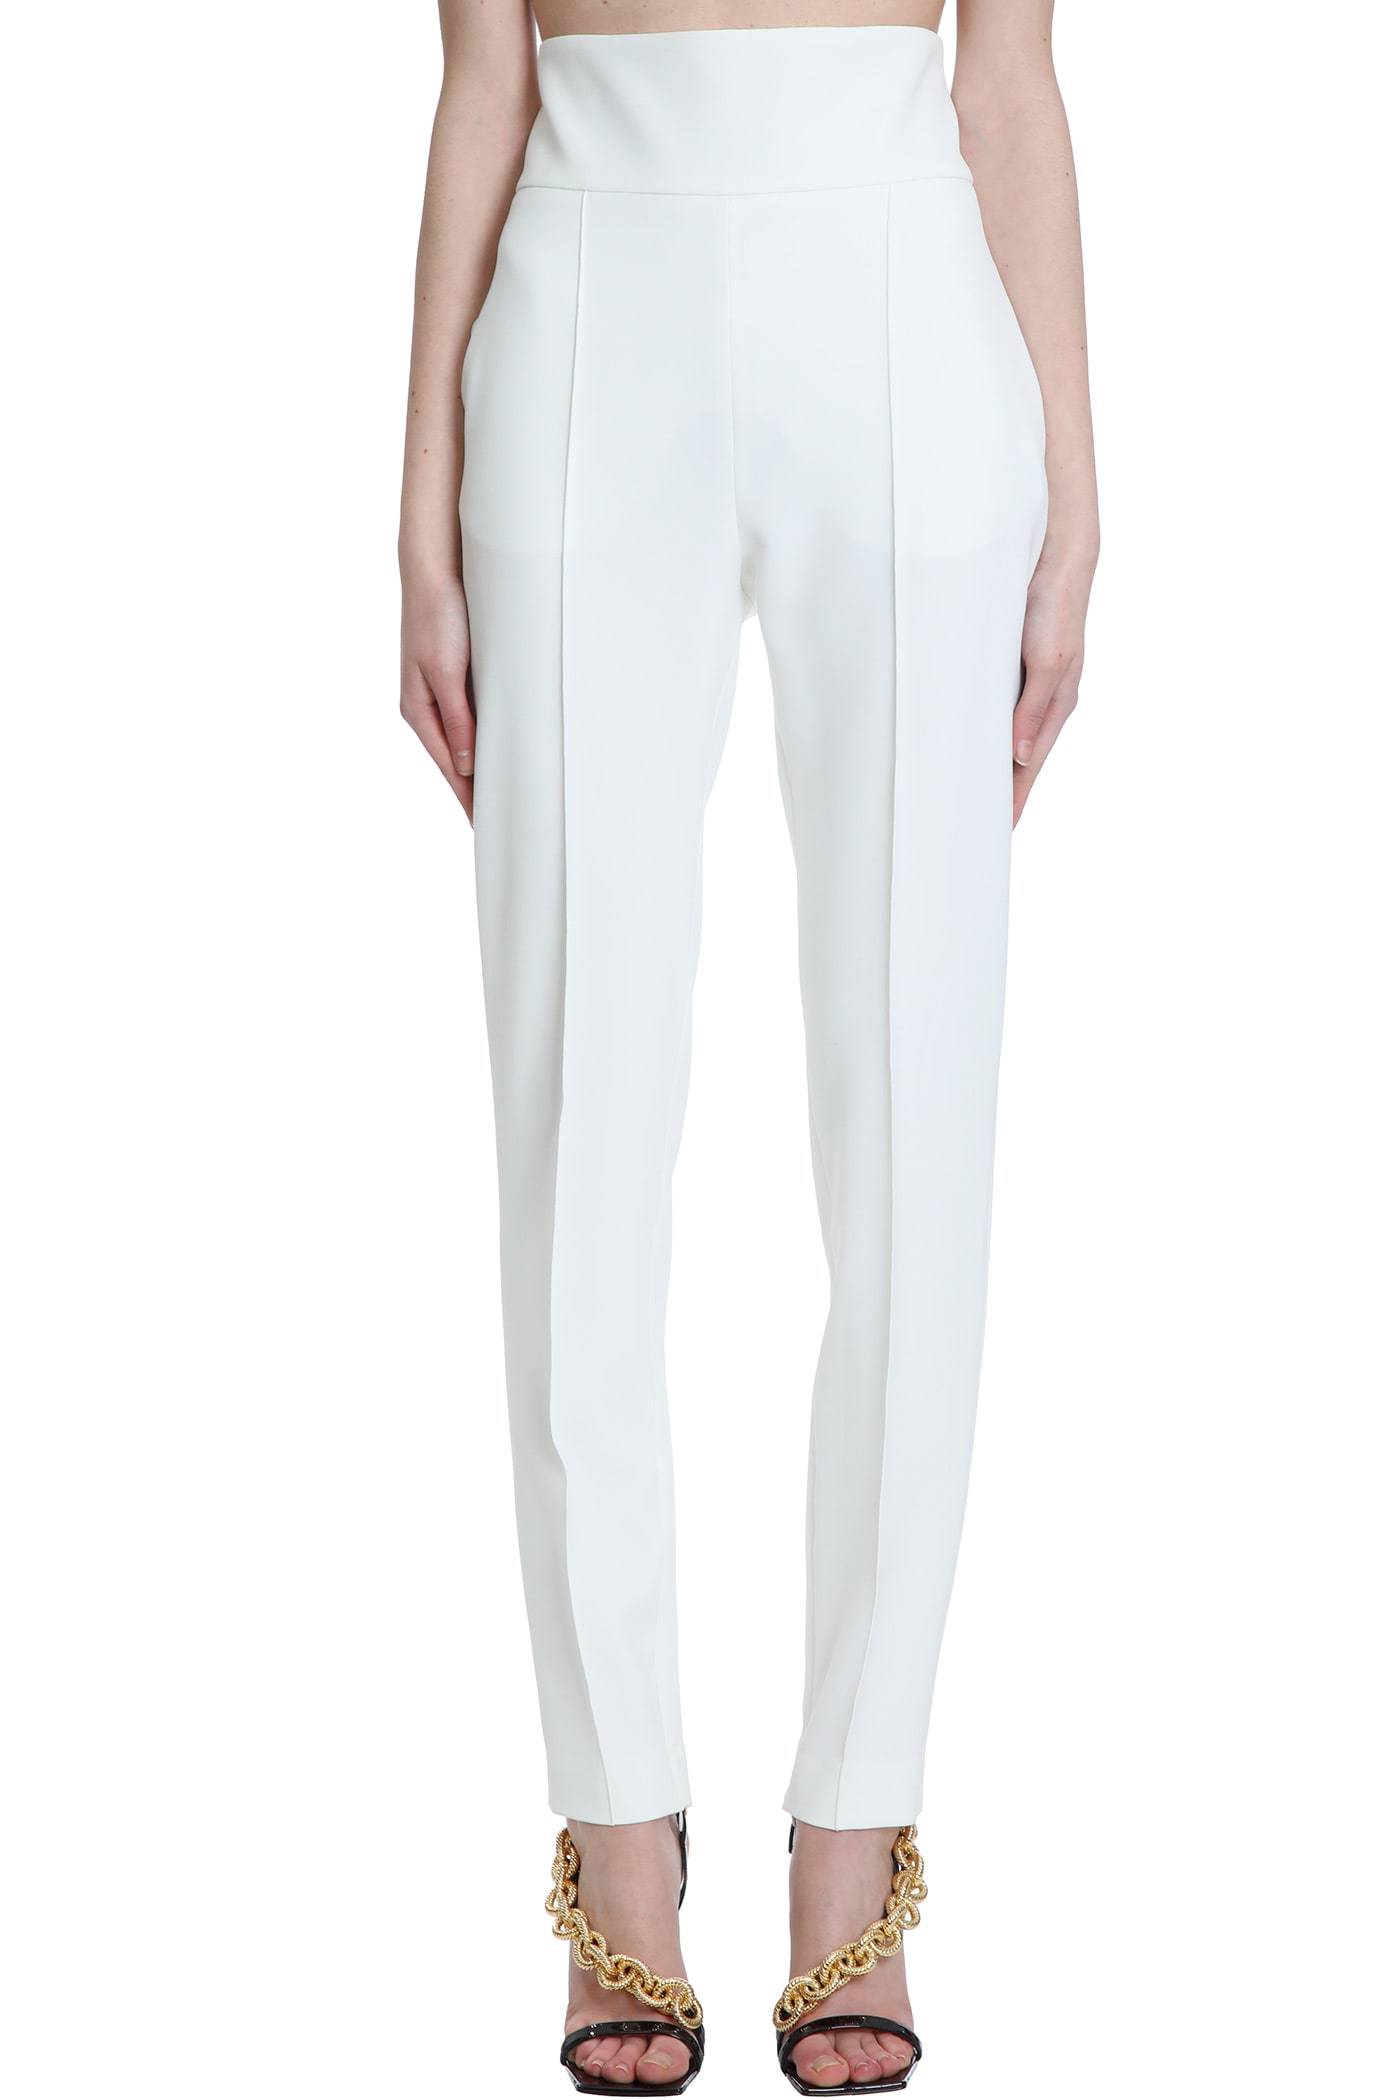 ALEXANDRE VAUTHIER PANTS IN WHITE POLYESTER,211PA900